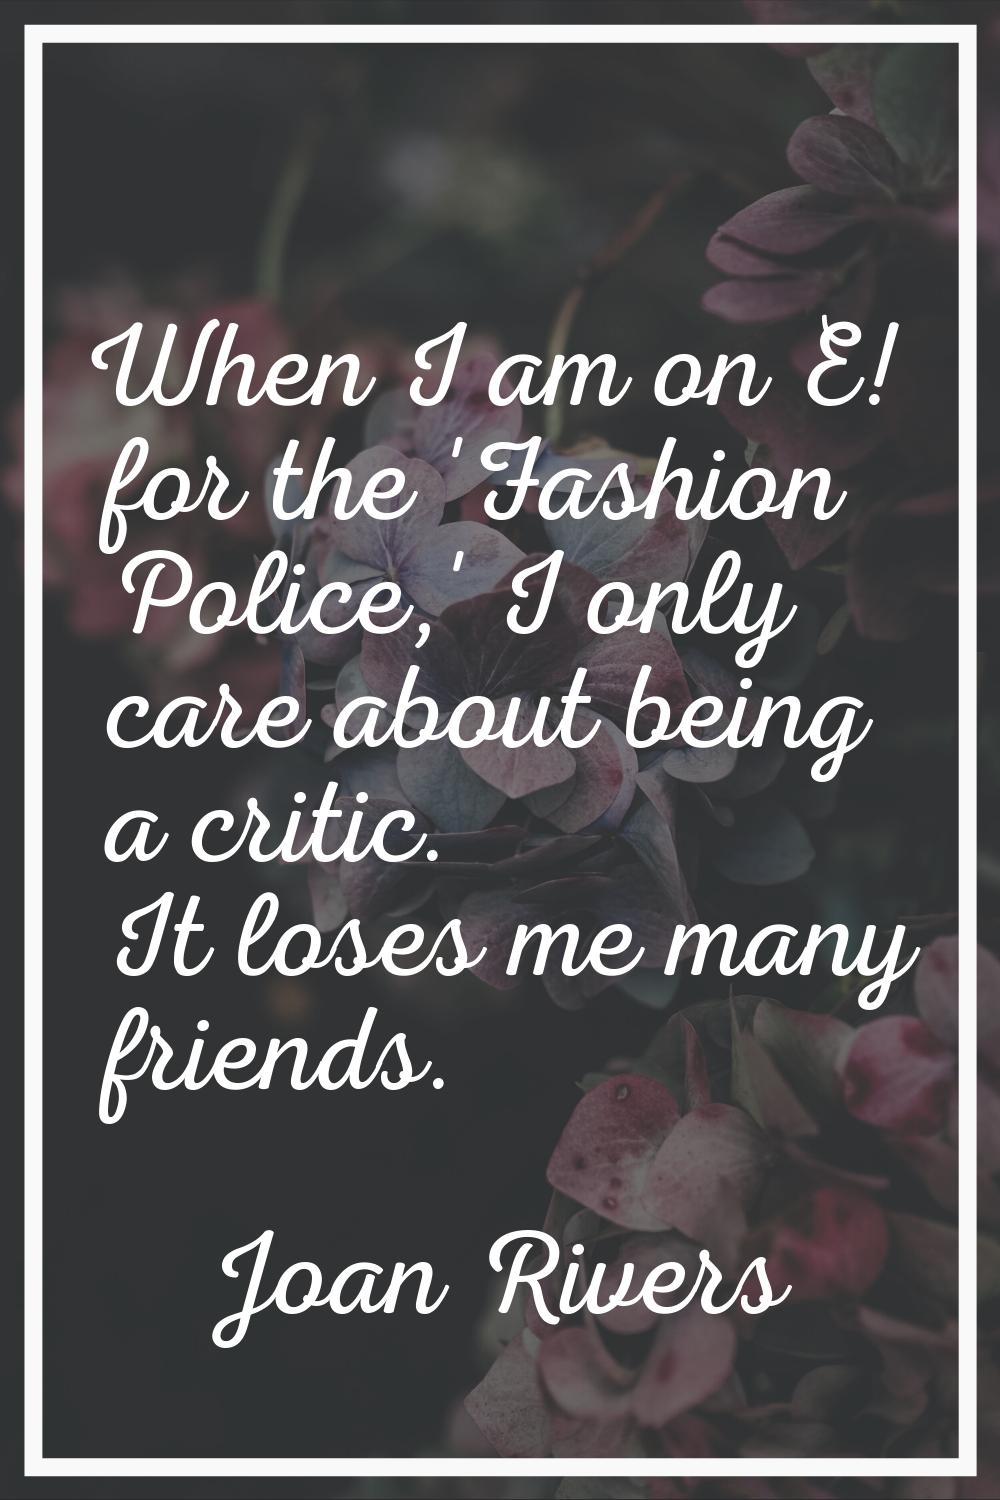 When I am on E! for the 'Fashion Police,' I only care about being a critic. It loses me many friend